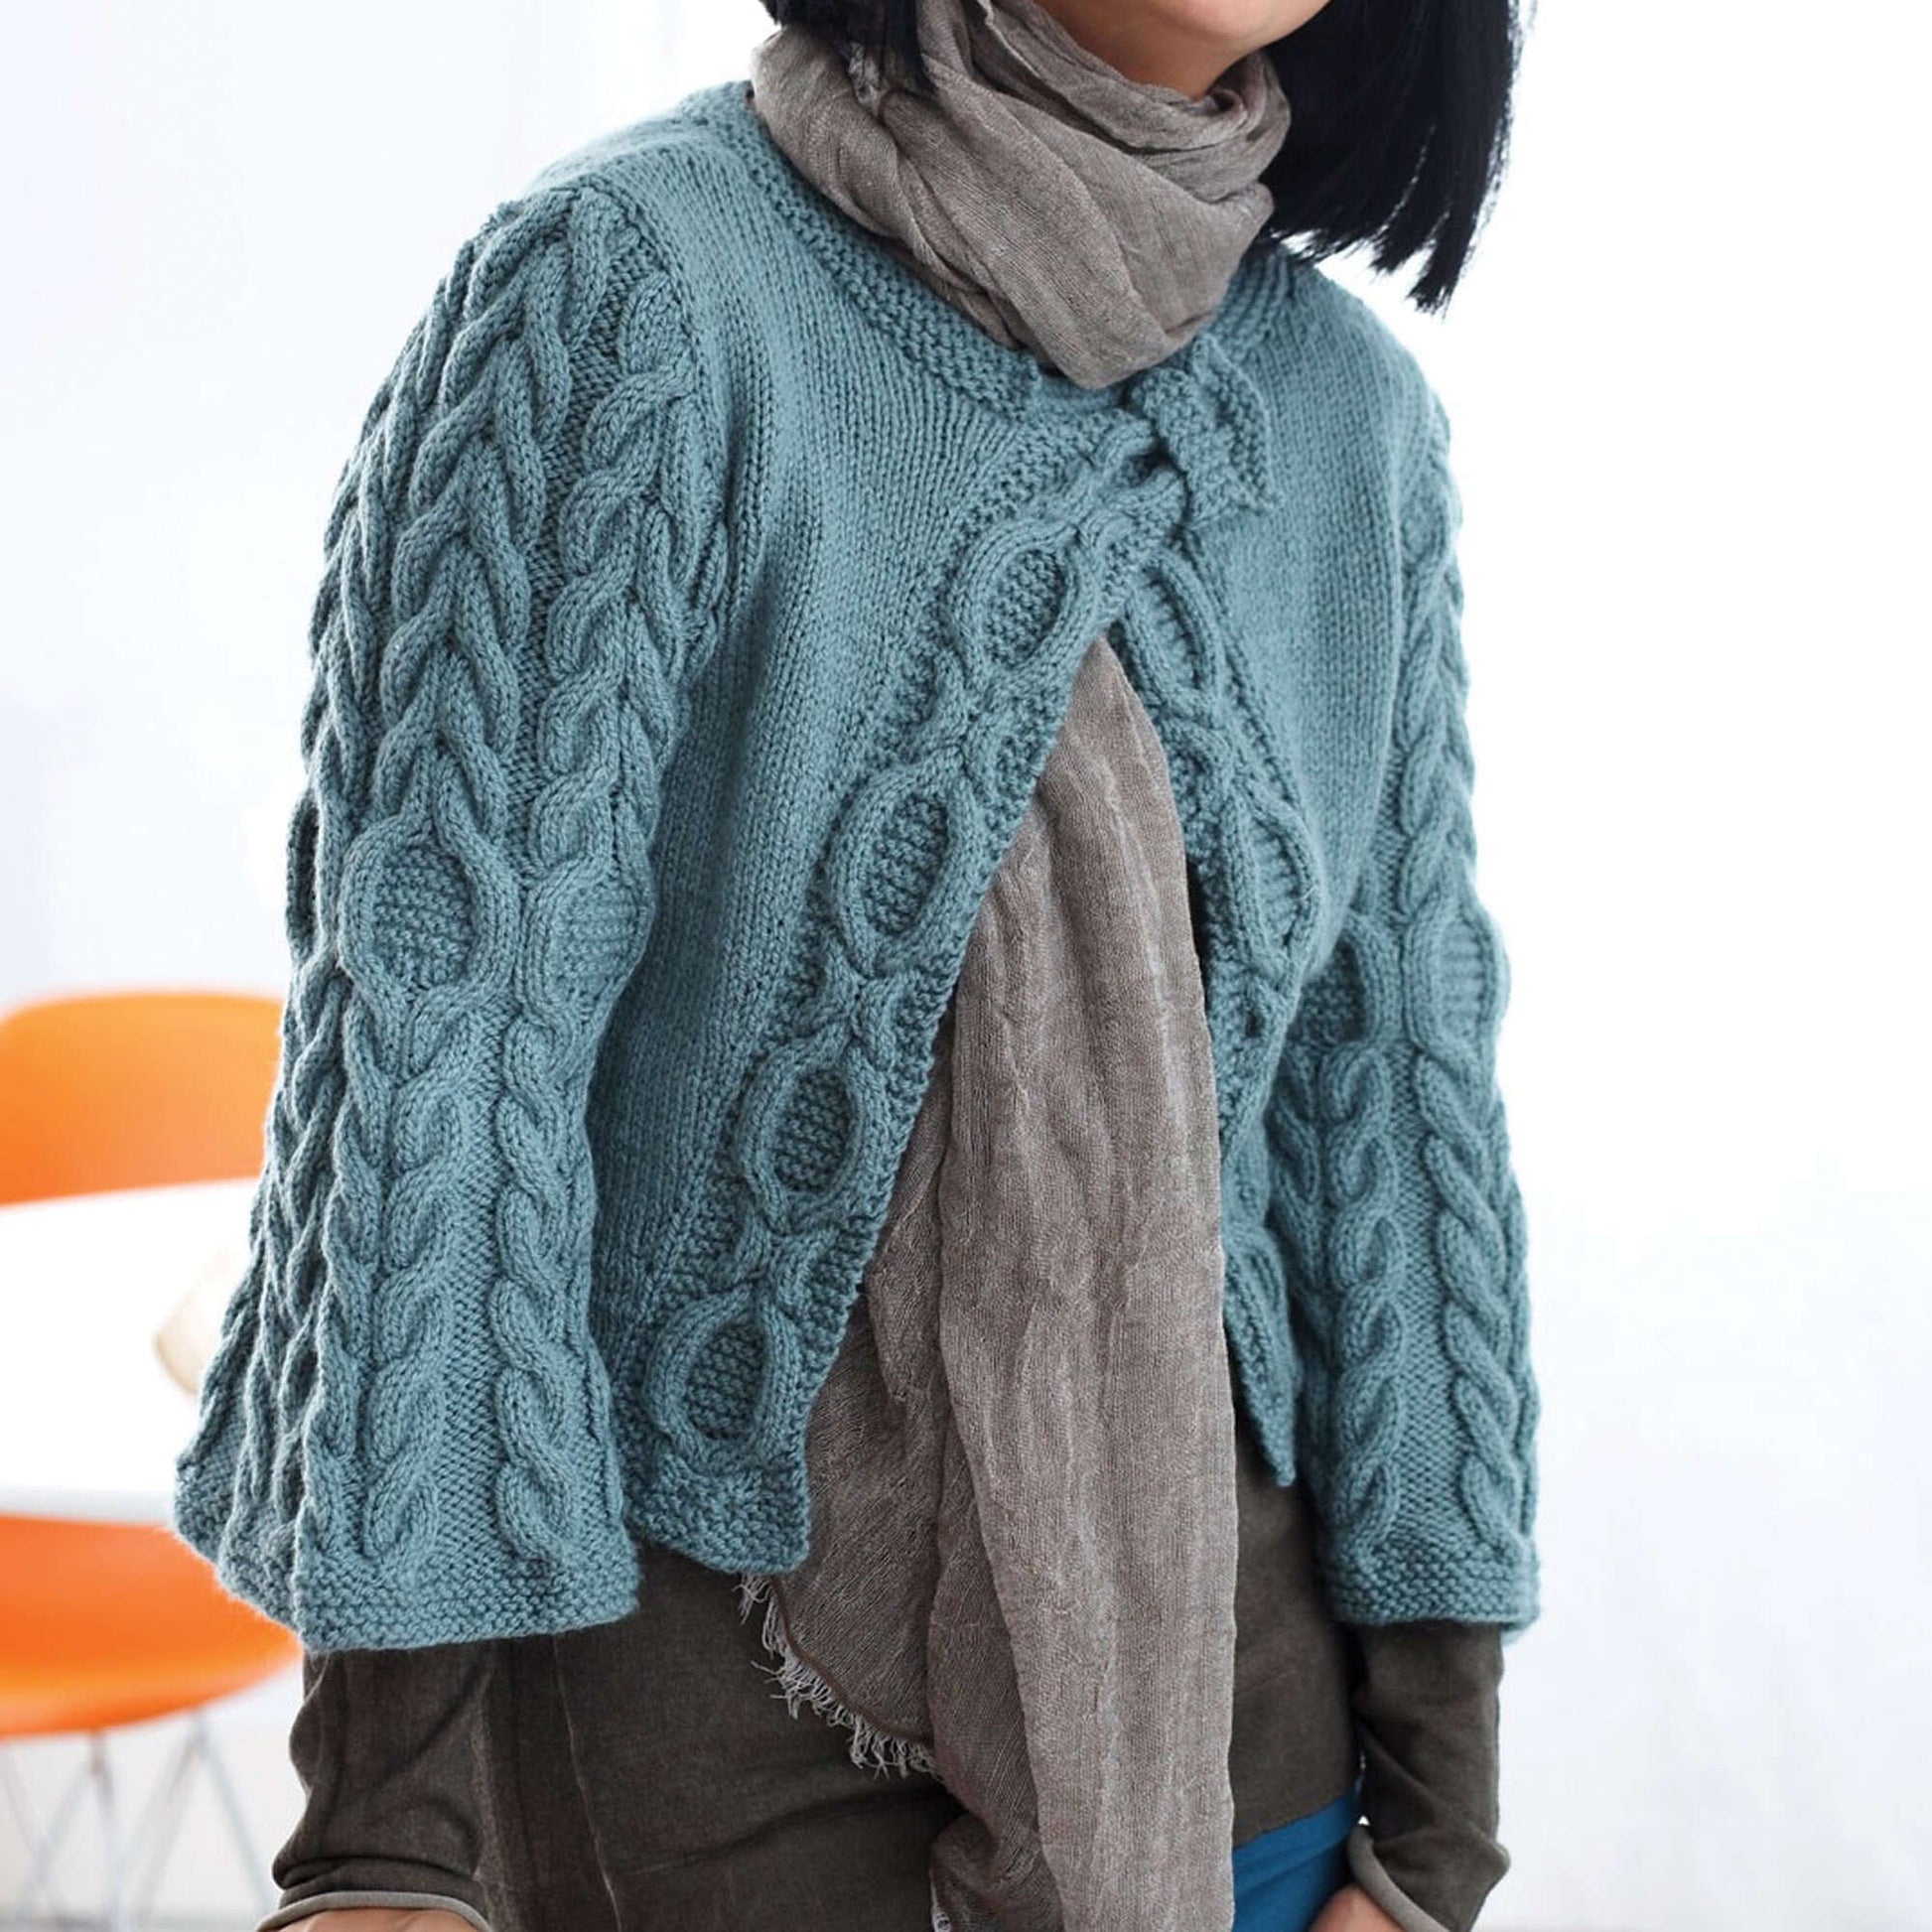 Free Patons Diagonal Cables Knit Cardigan Pattern